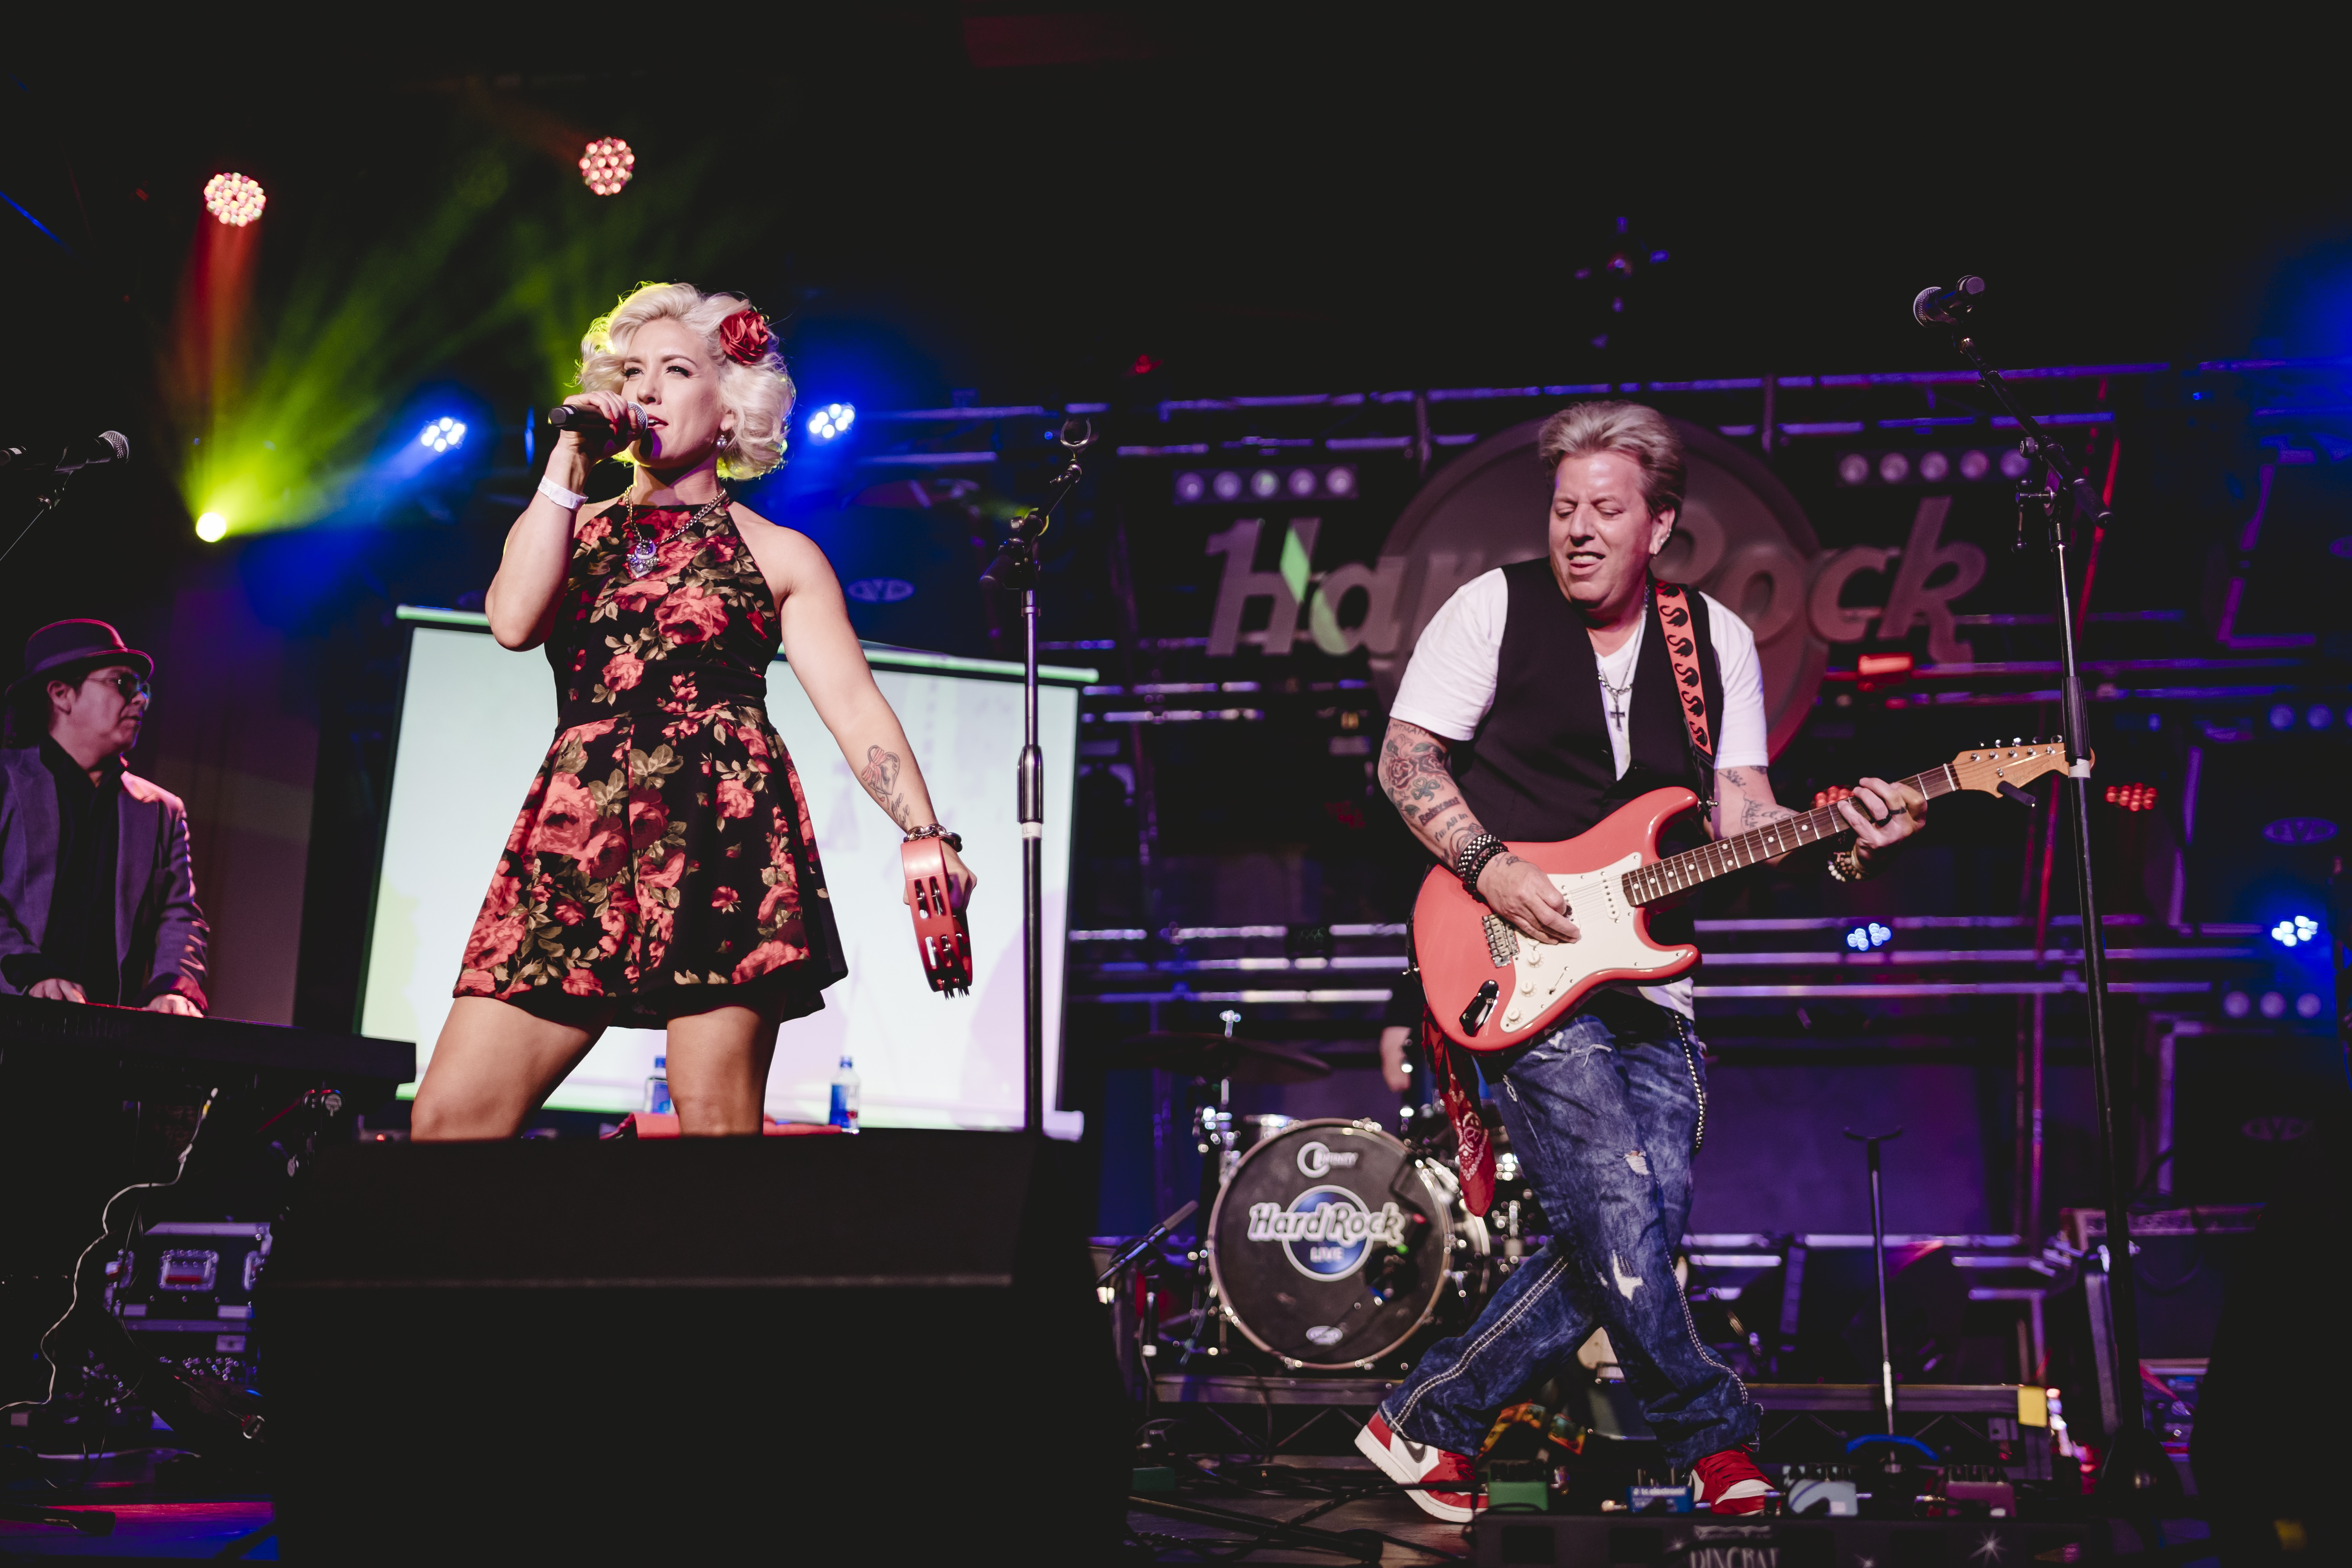 The Swansons, a Southern California Country Rock Band opened for the 2018 Las Vegas F.A.M.E. Awards show by performing three songs at the ceremony on the Las Vegas Strip at the Hard Rock Live!